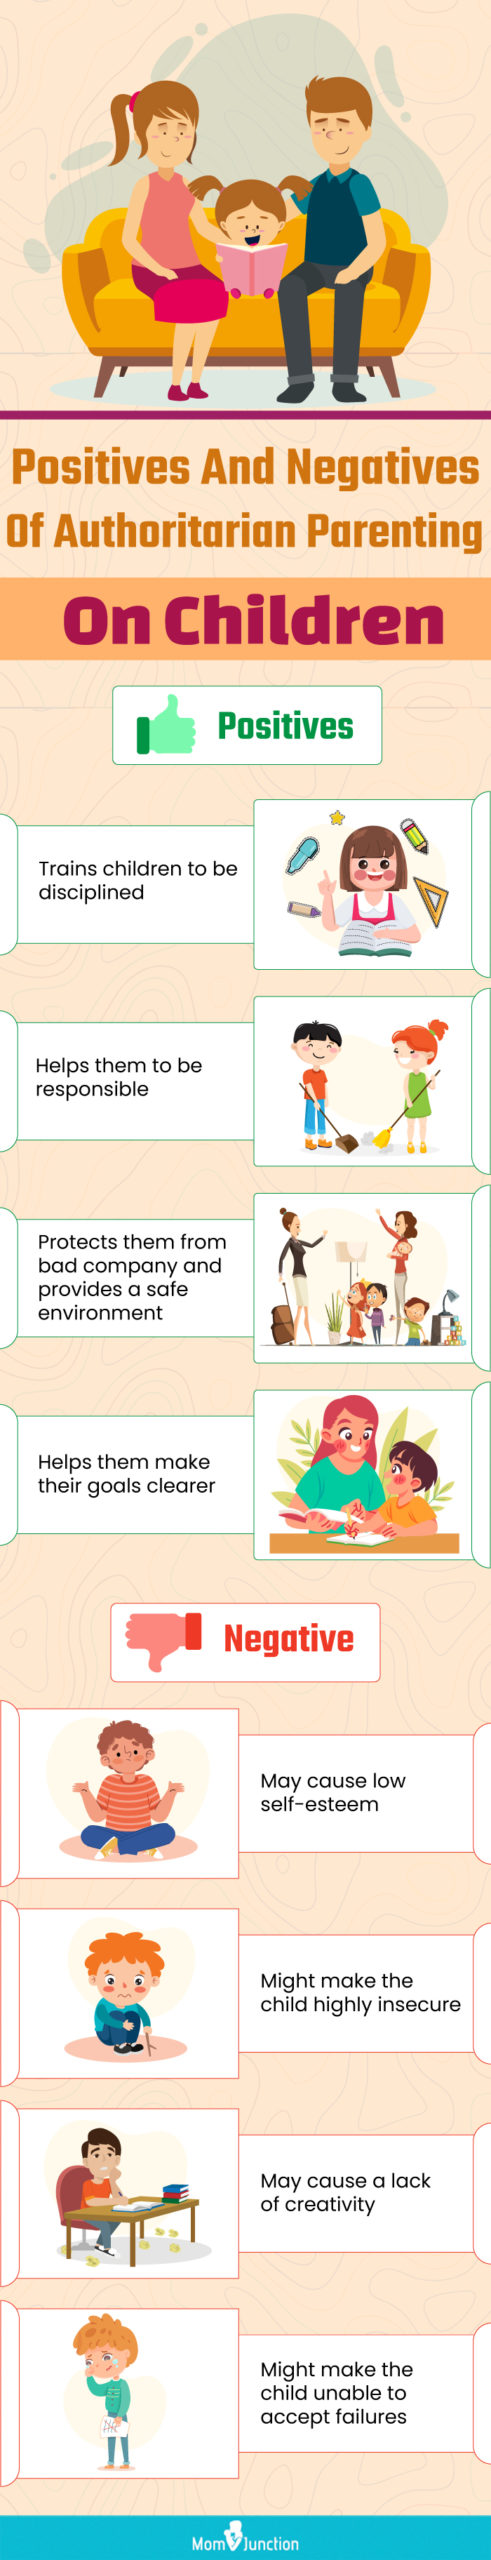 positives and negatives of authoritarian parenting on children (infographic)